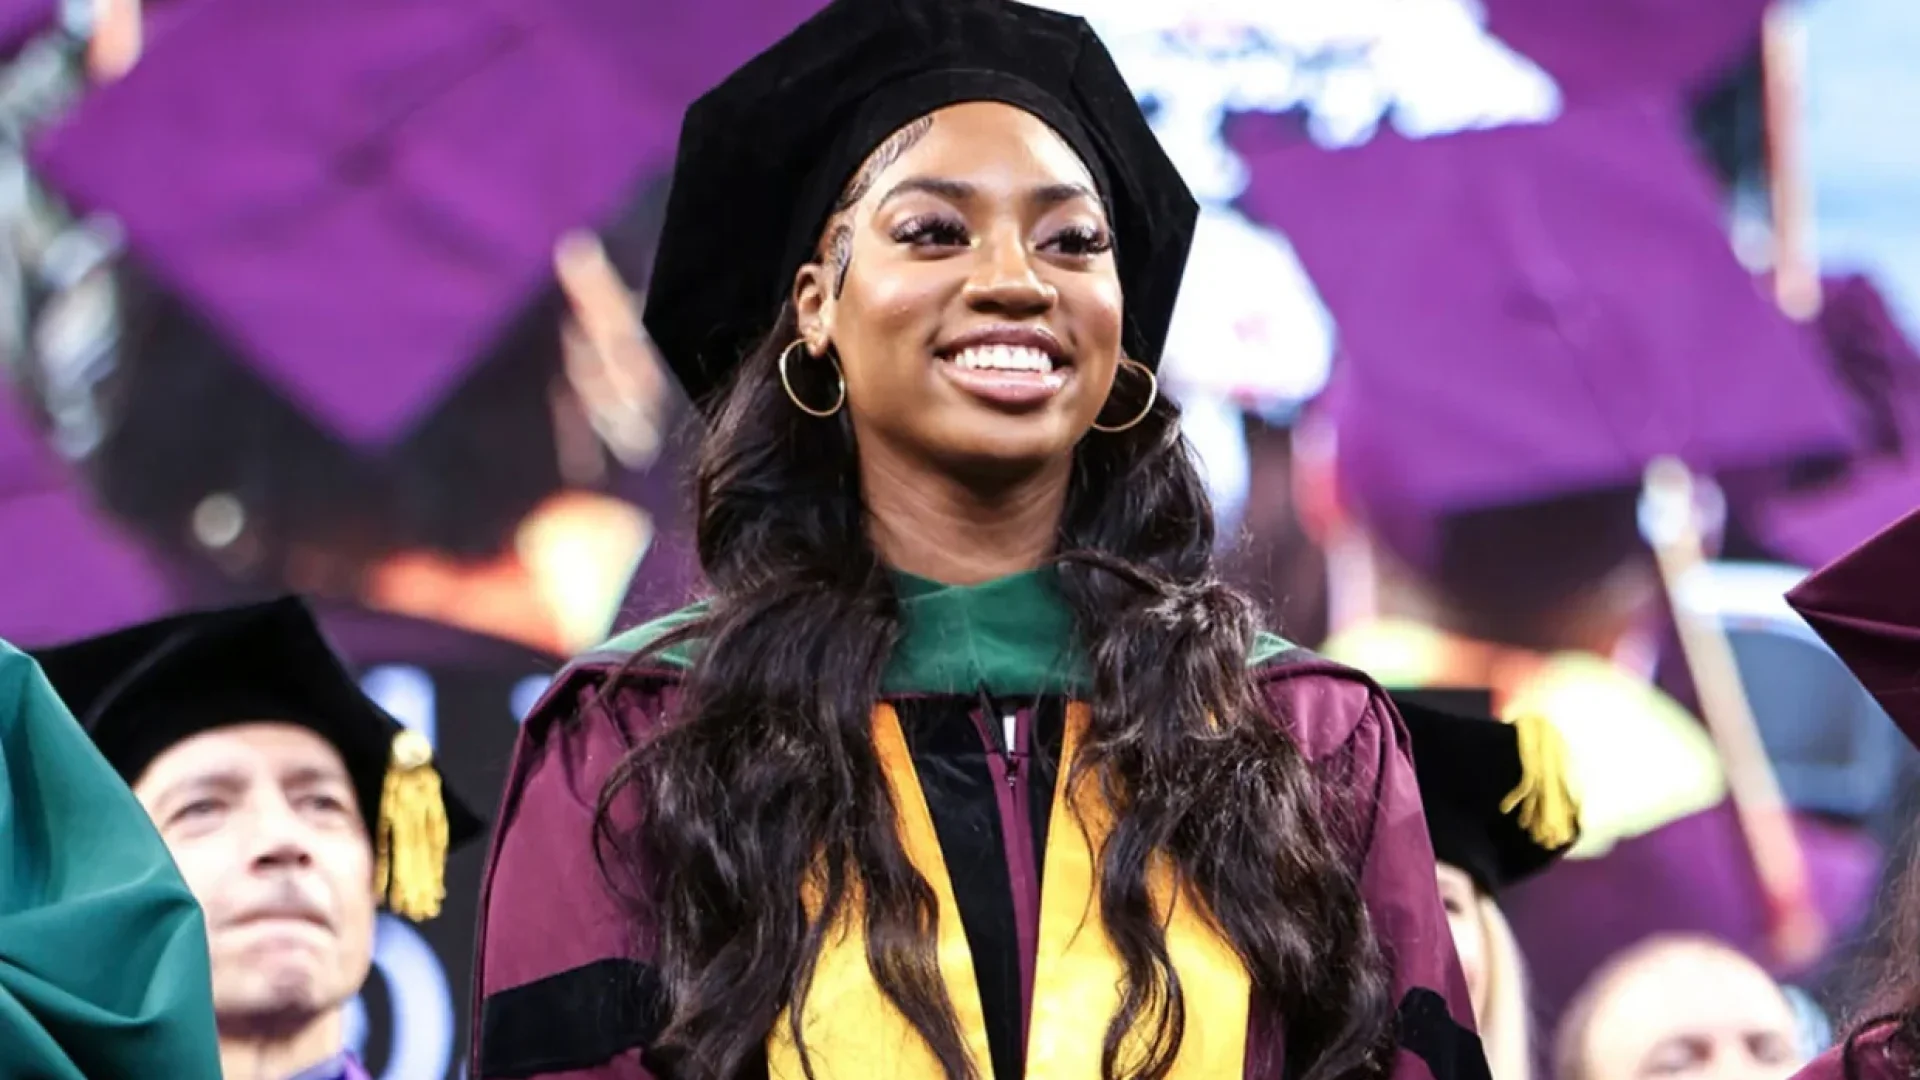 This Chicago Teen Started College At Age 10. Now She's Earned Her Doctorate At 17 Years Old